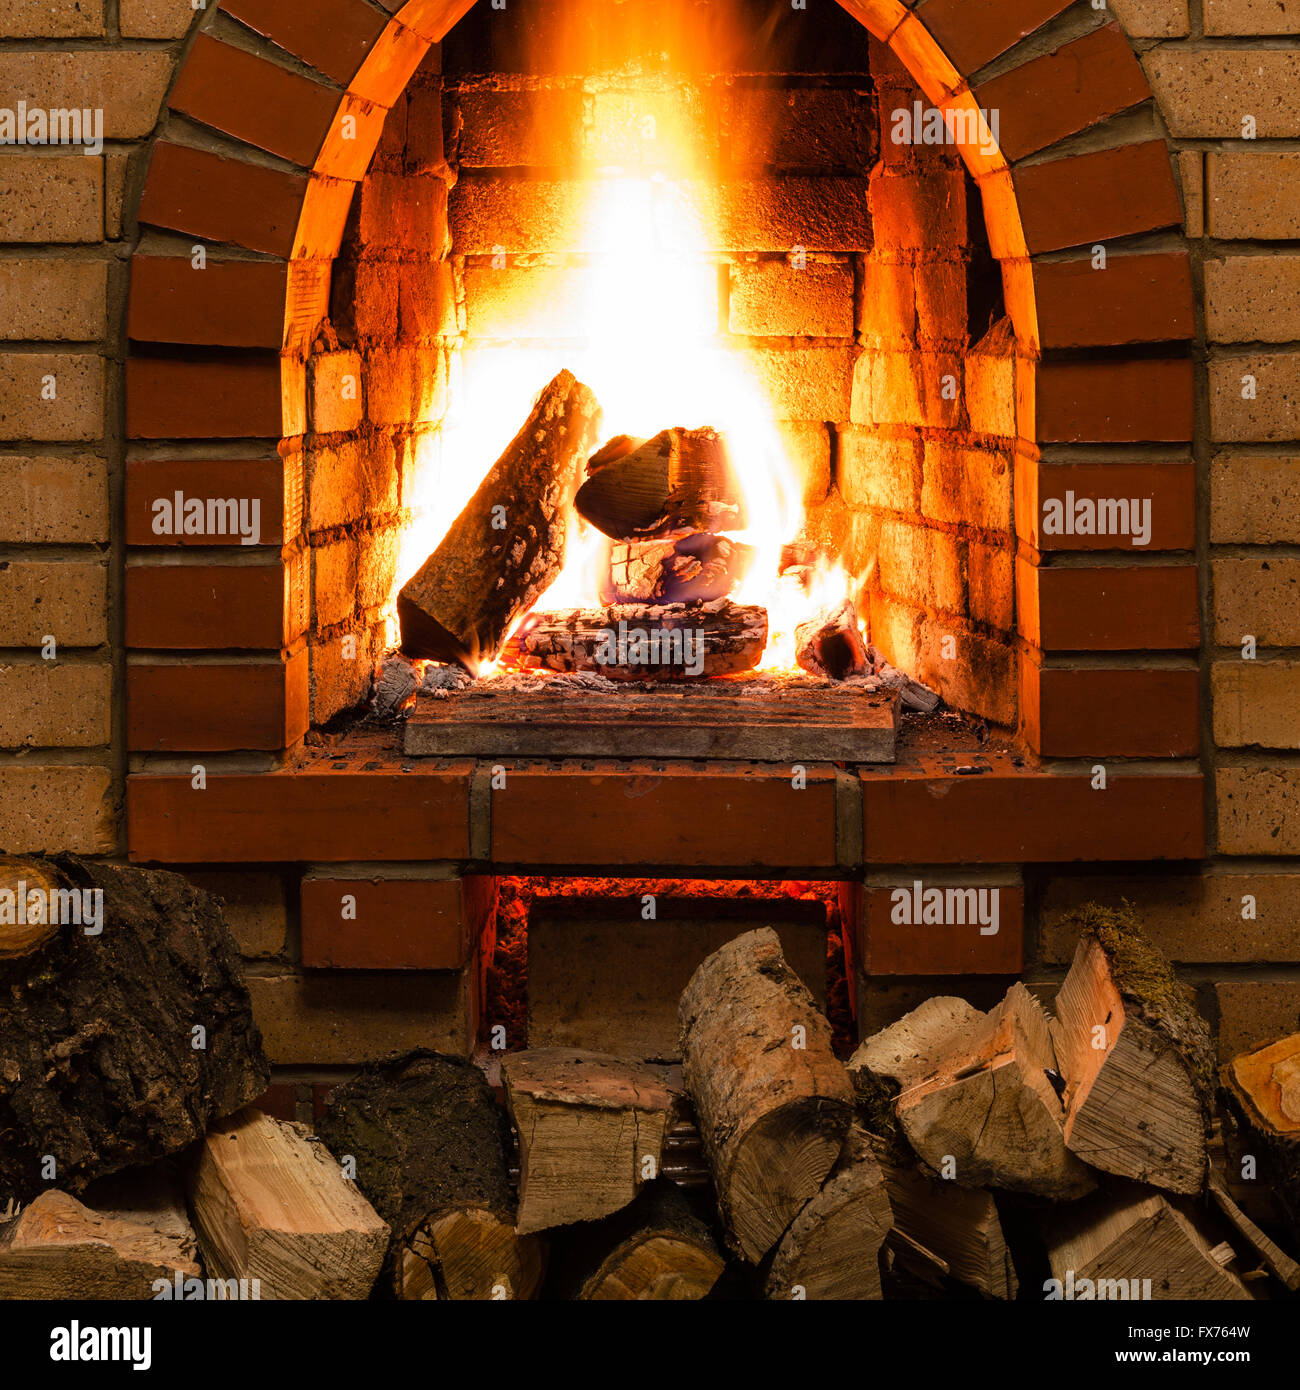 stack of wood and tongues of fire in indoor brick fireplace in country cottage Stock Photo